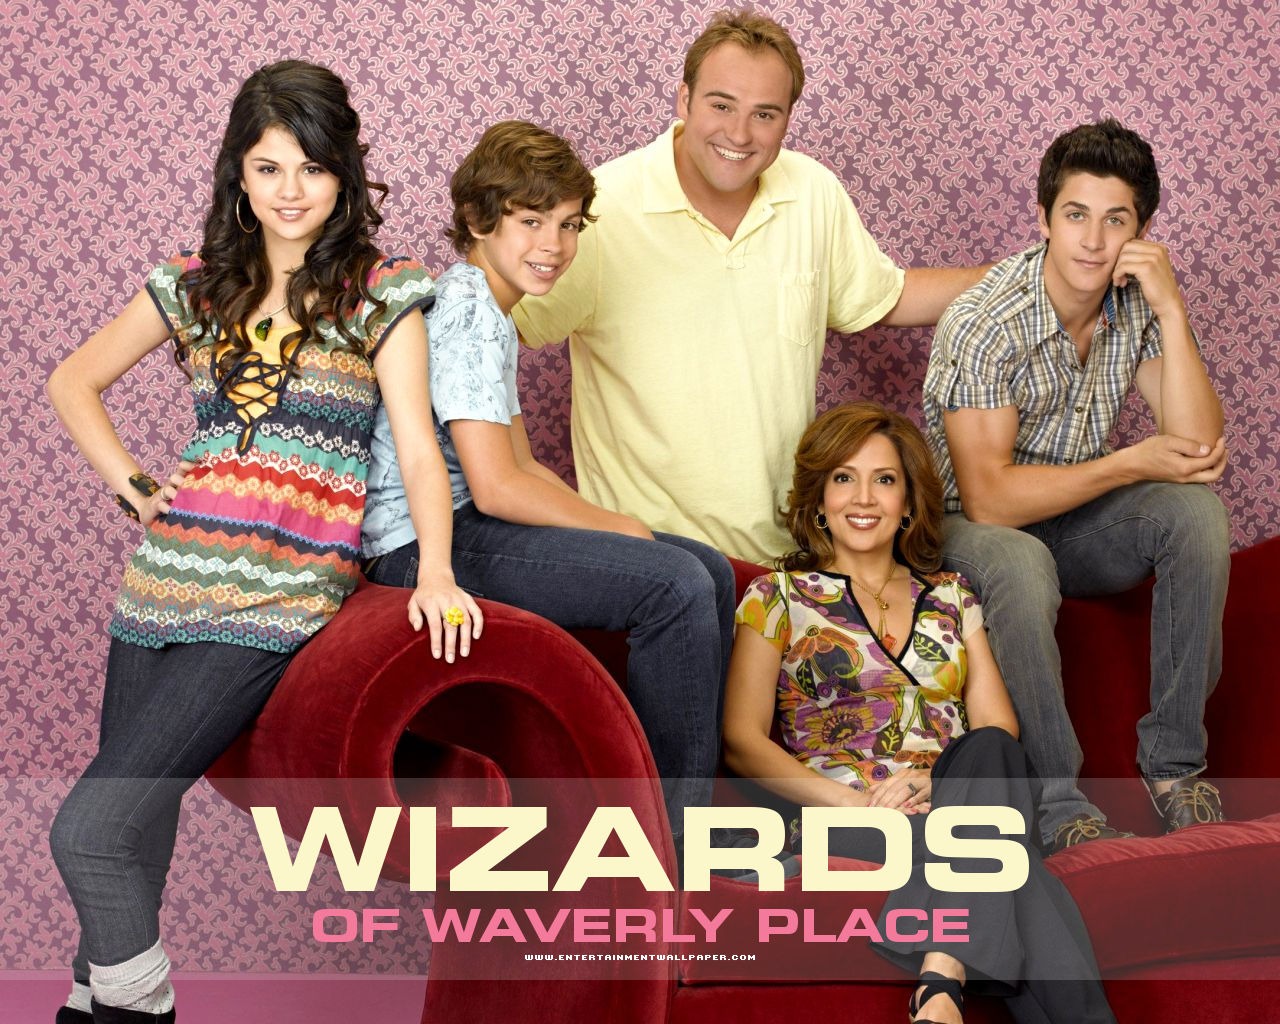 Wizards of Waverly Place Tapete #1 - 1280x1024